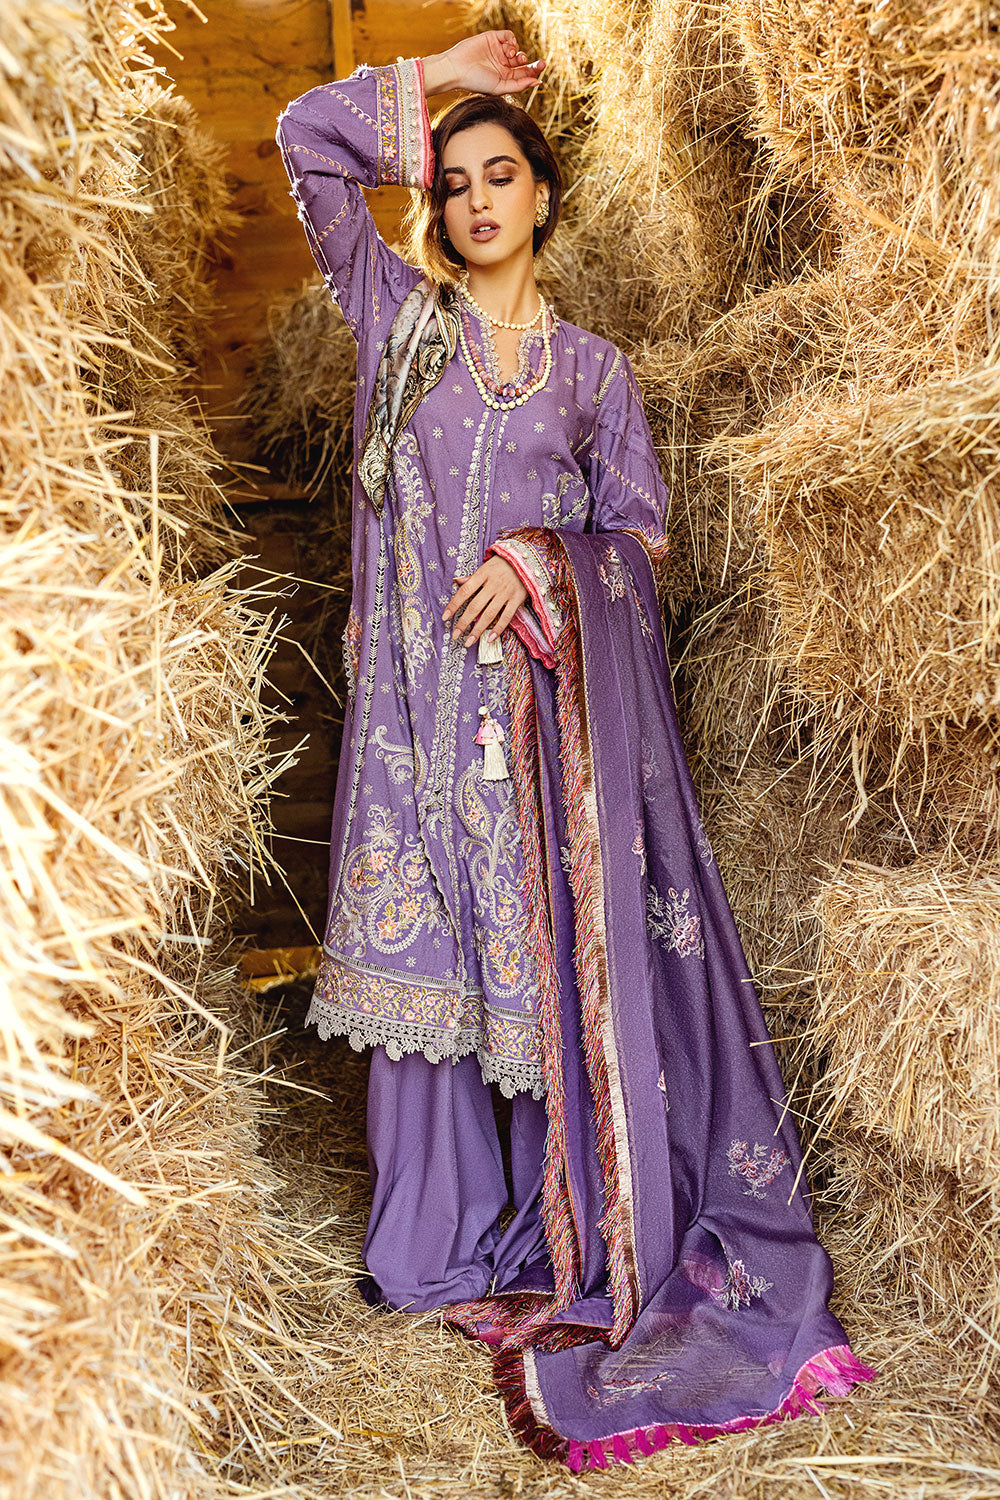 Winter Collection - Sobia Nazir - Autumn Winter - AW#06 A available at Saleem Fabrics Traditions